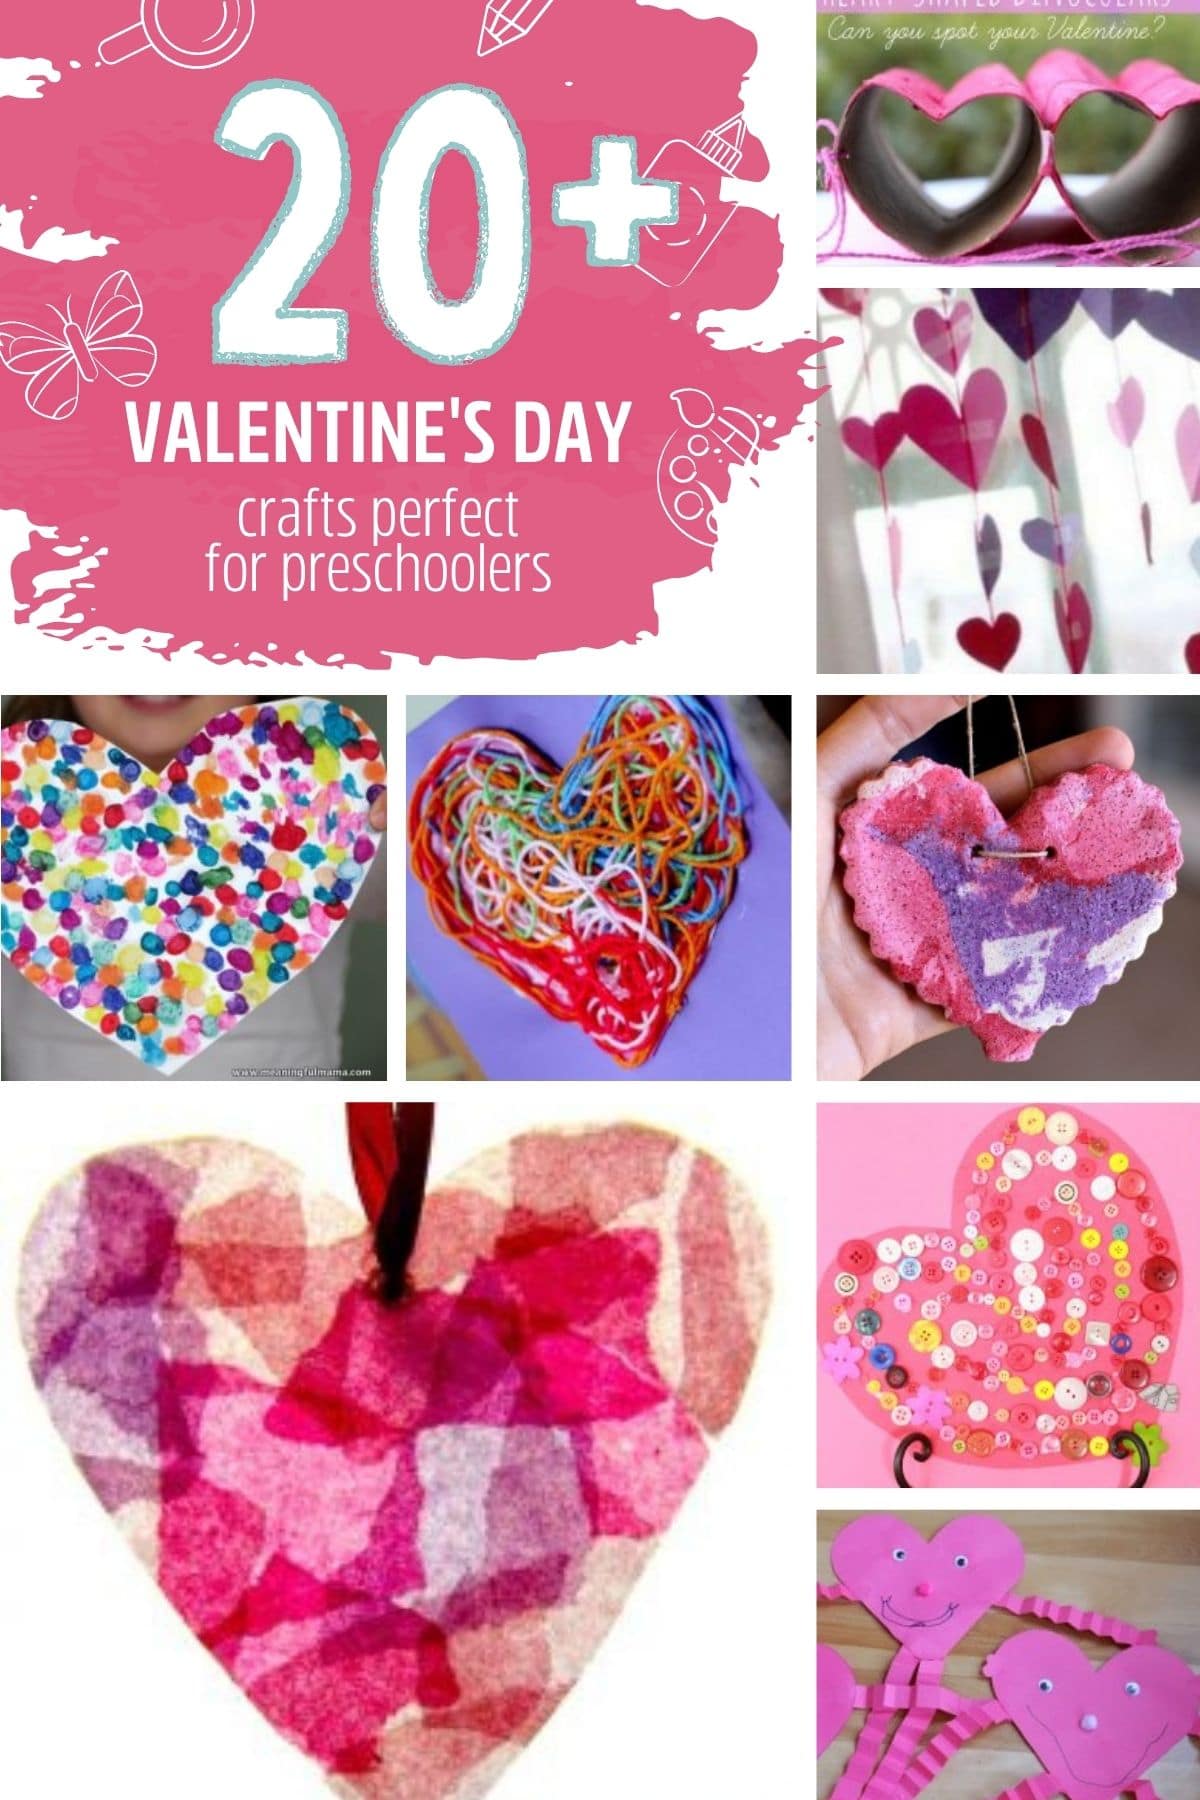 3 Fresh, Simple Paper Heart Crafts You Can Make in Minutes